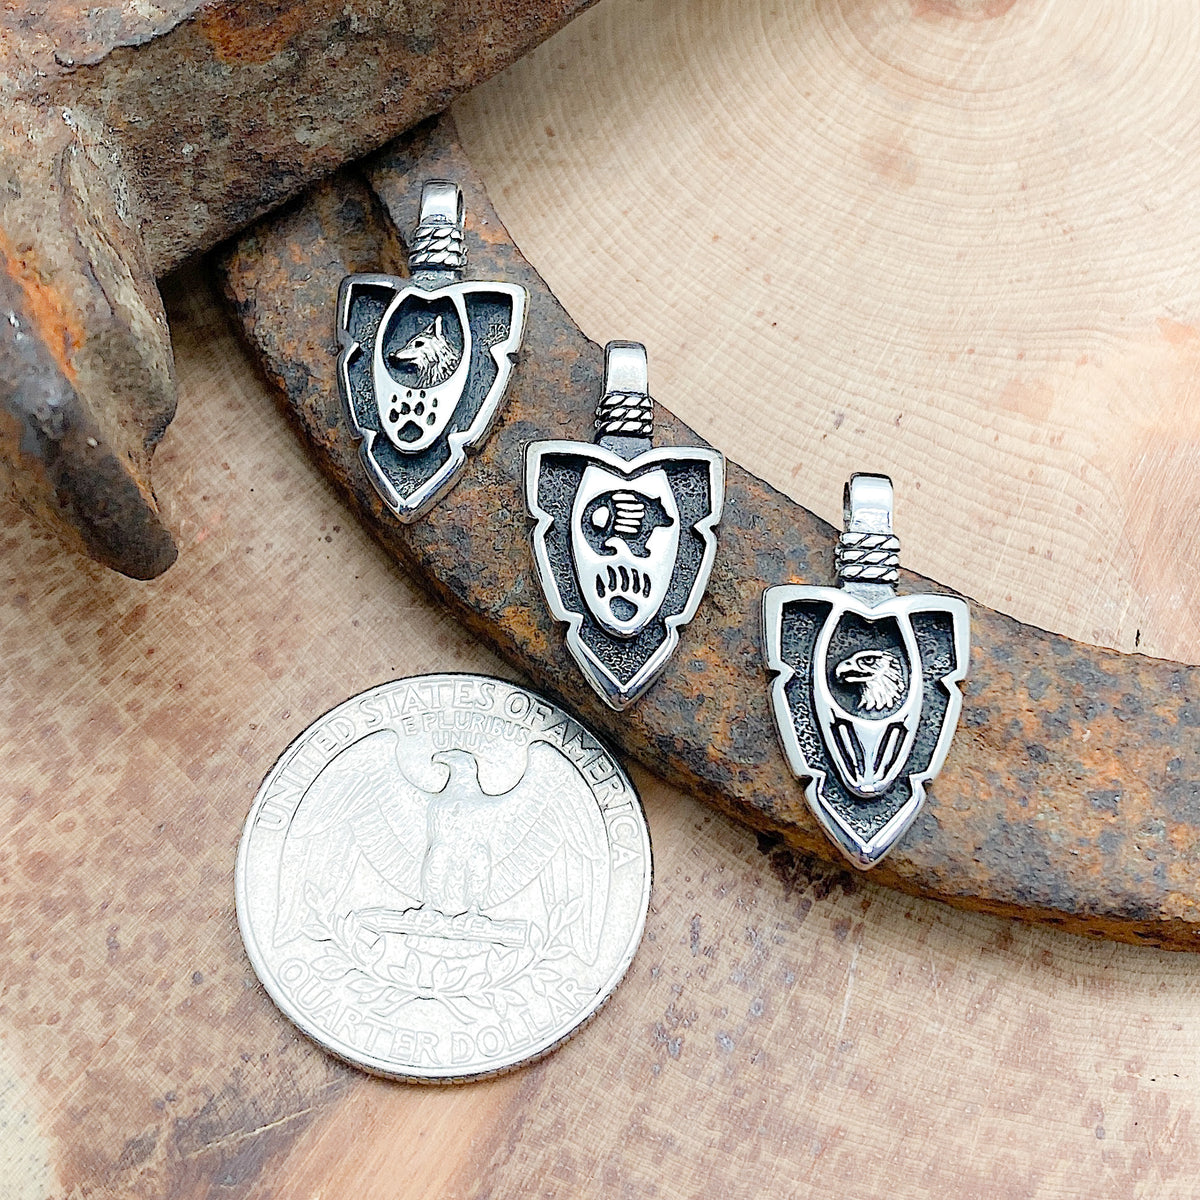 Comparison shot of a US quarter coin various arrowhead pendants laid in a row, each with a different animal and symbol etched within the pendant.